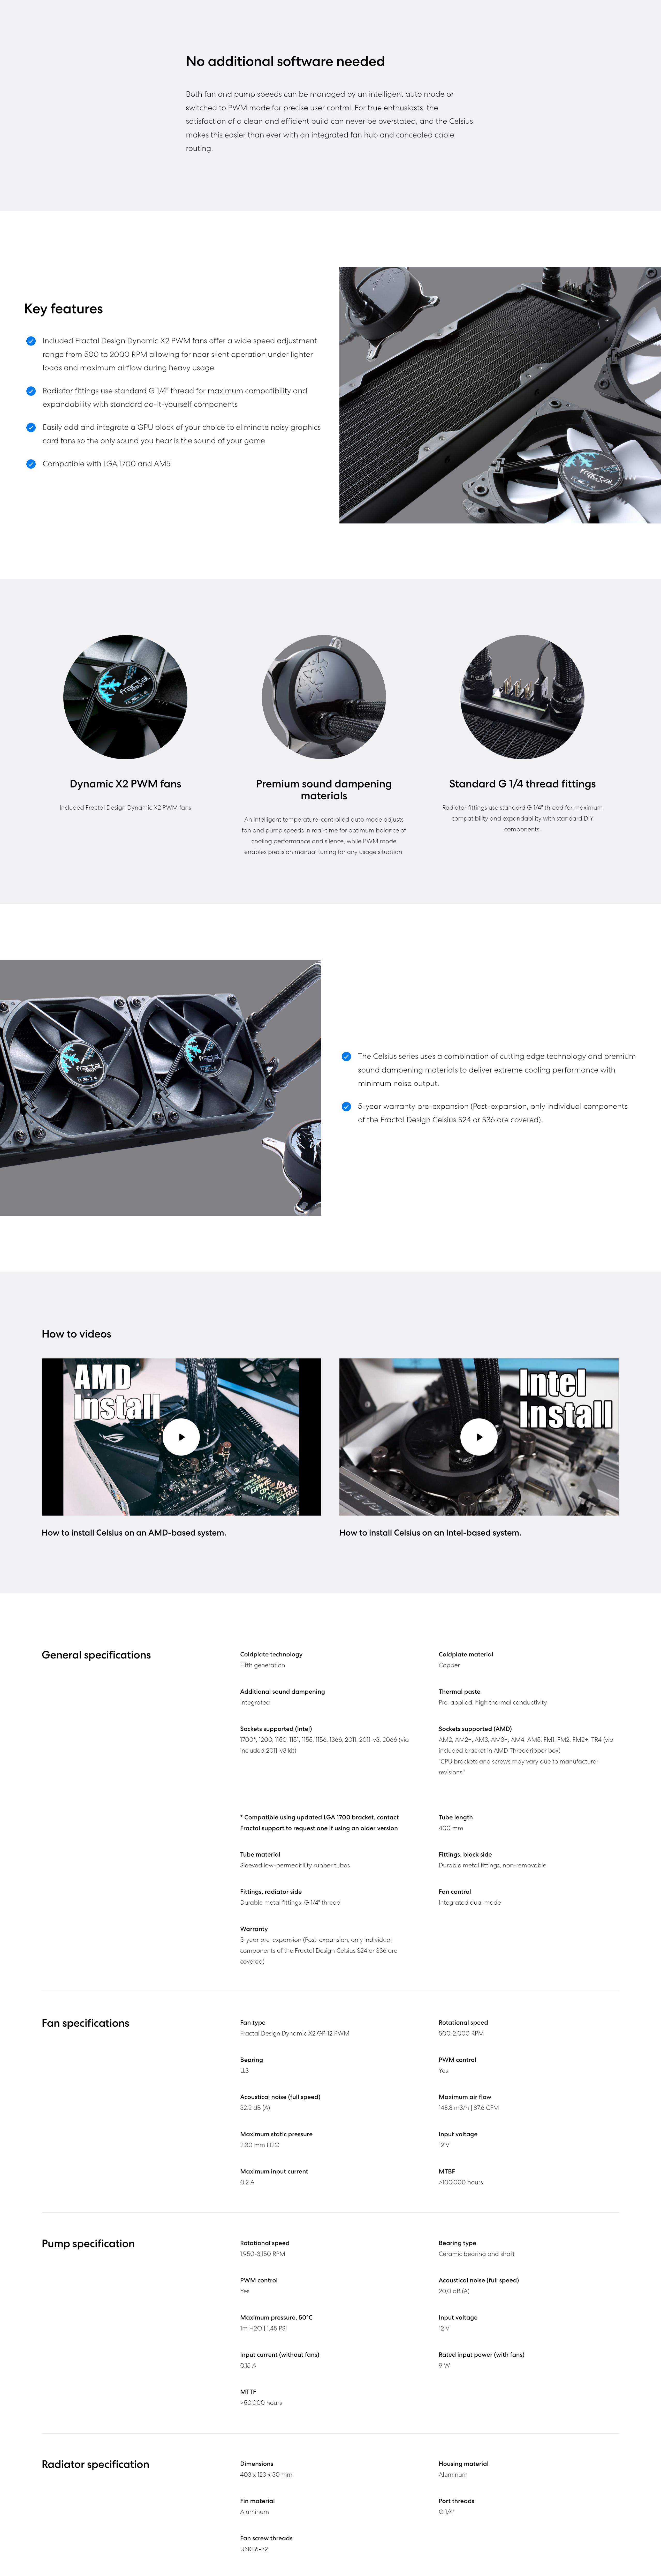 A large marketing image providing additional information about the product Fractal Design Celsius S36 360mm AIO CPU Cooler - Black - Additional alt info not provided